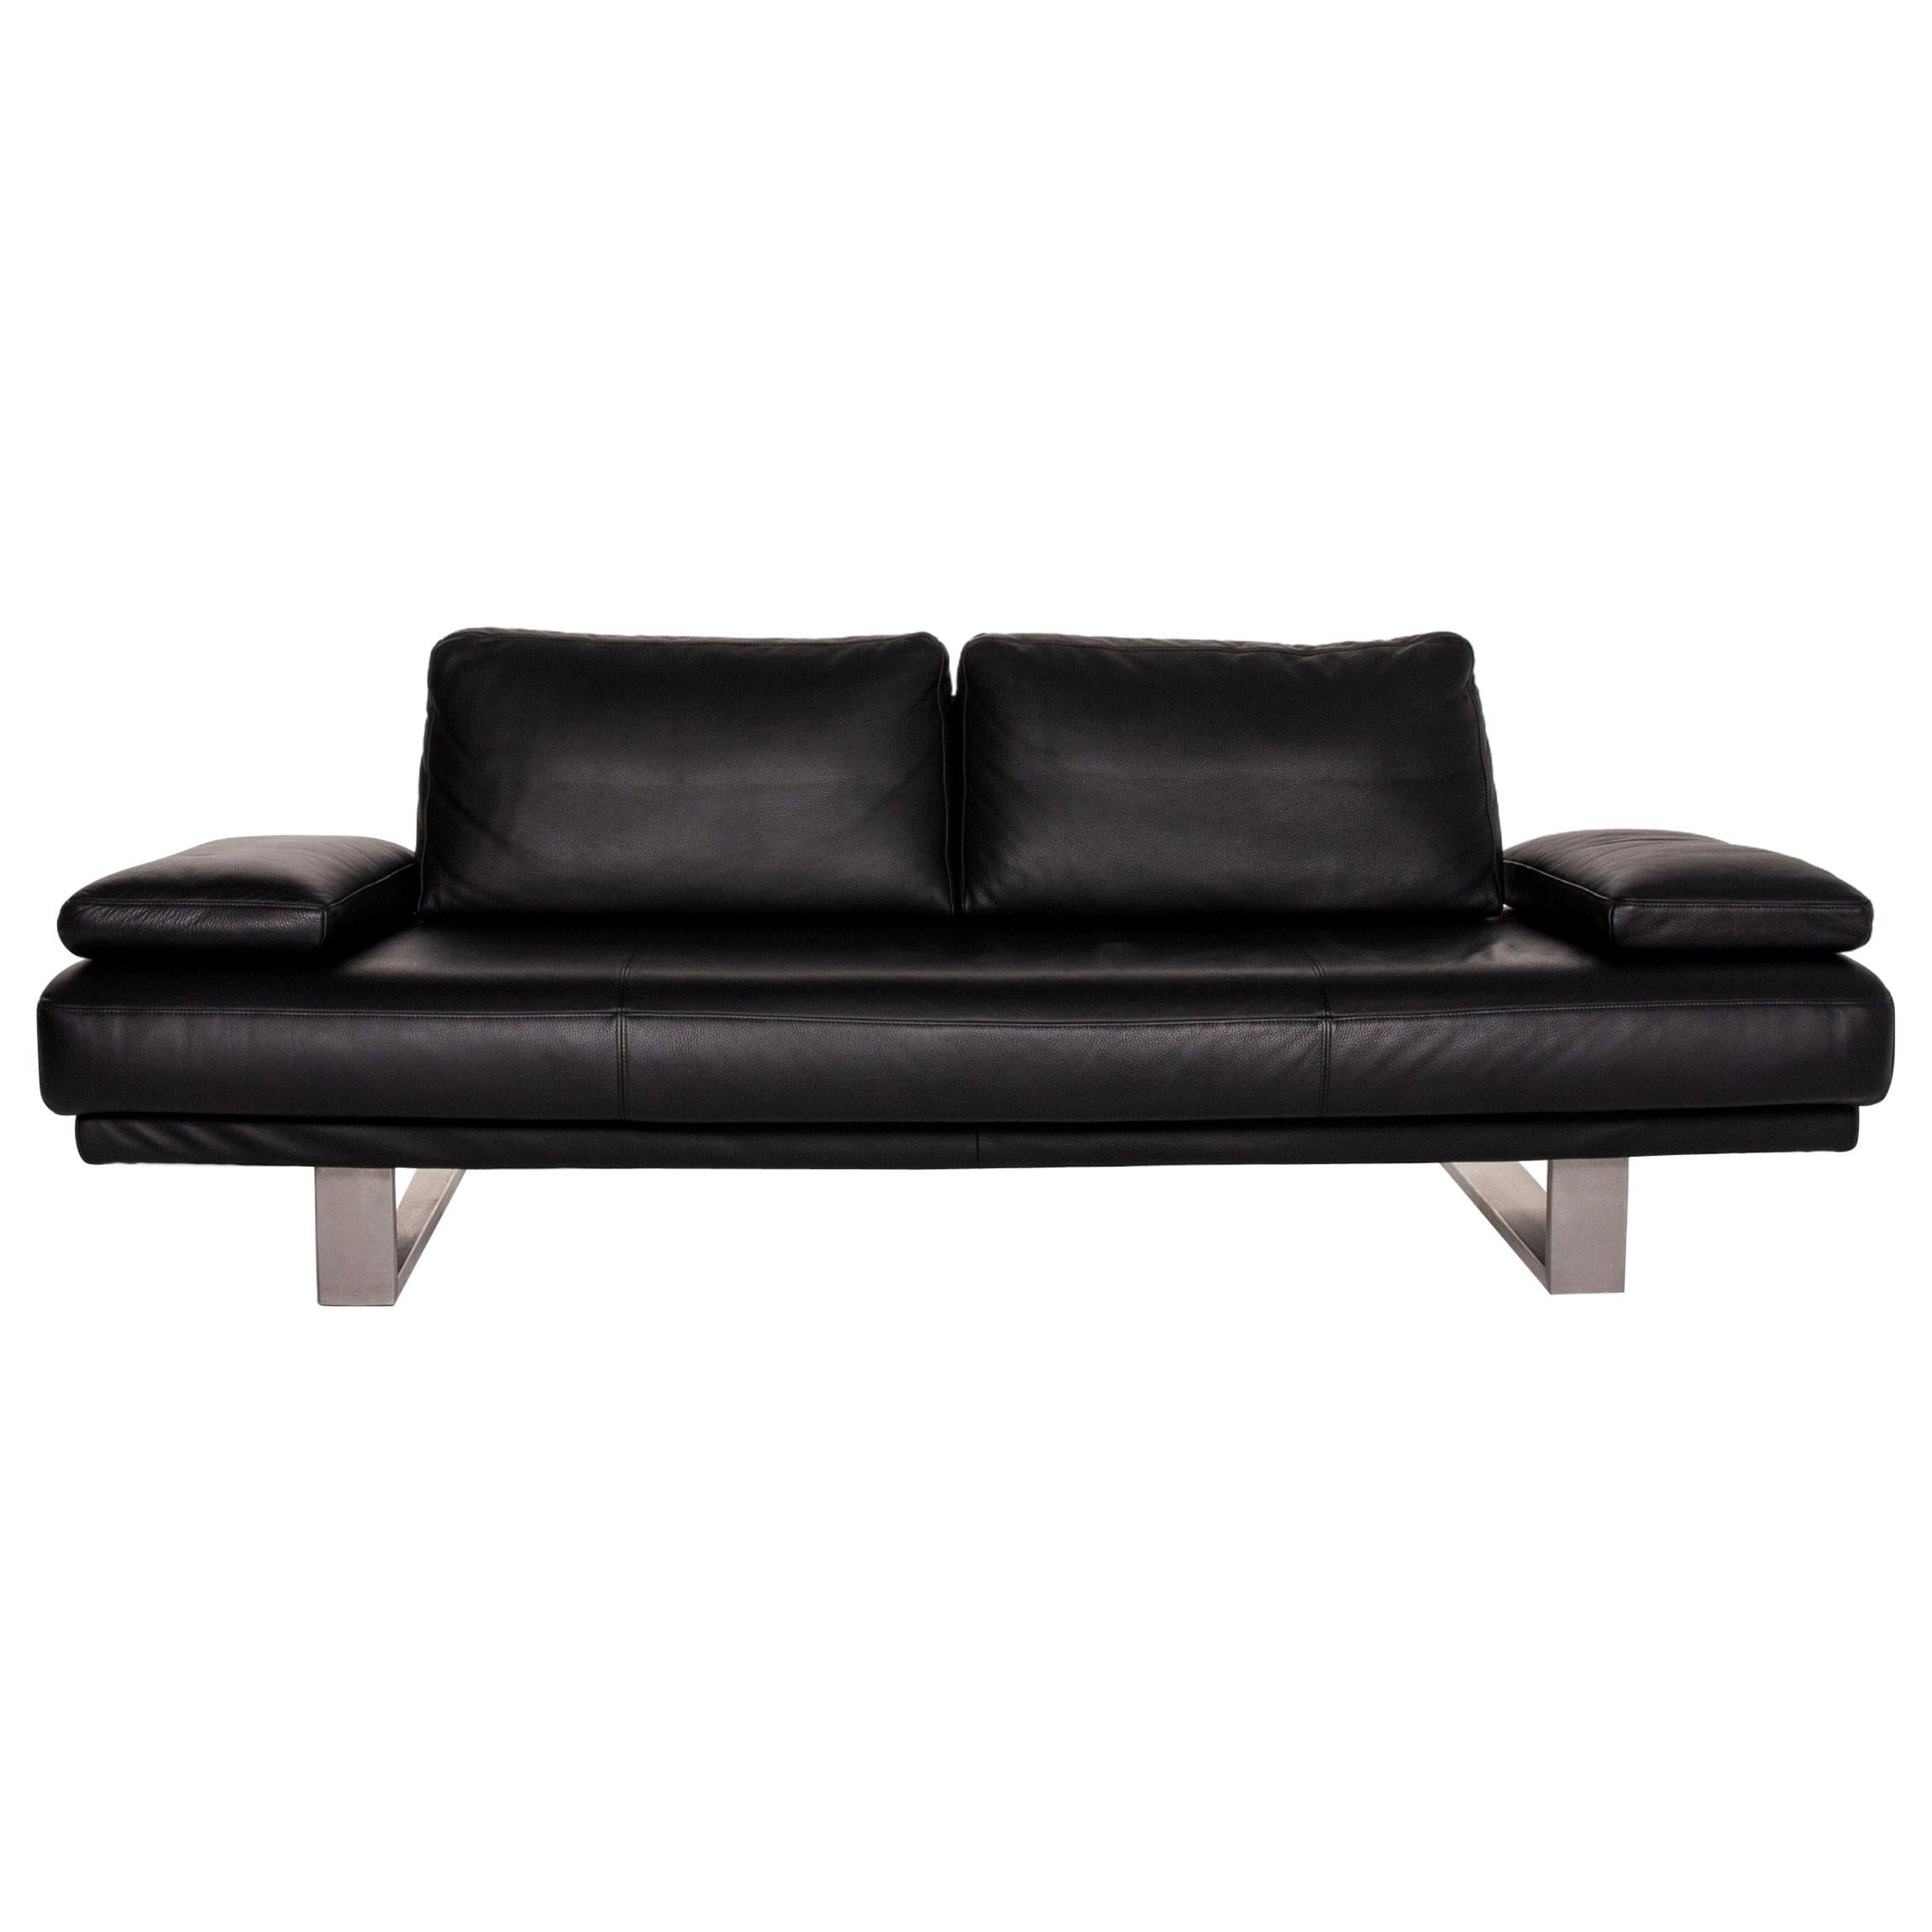 Rolf Benz 6600 Leather Sofa Three-Seat Couch